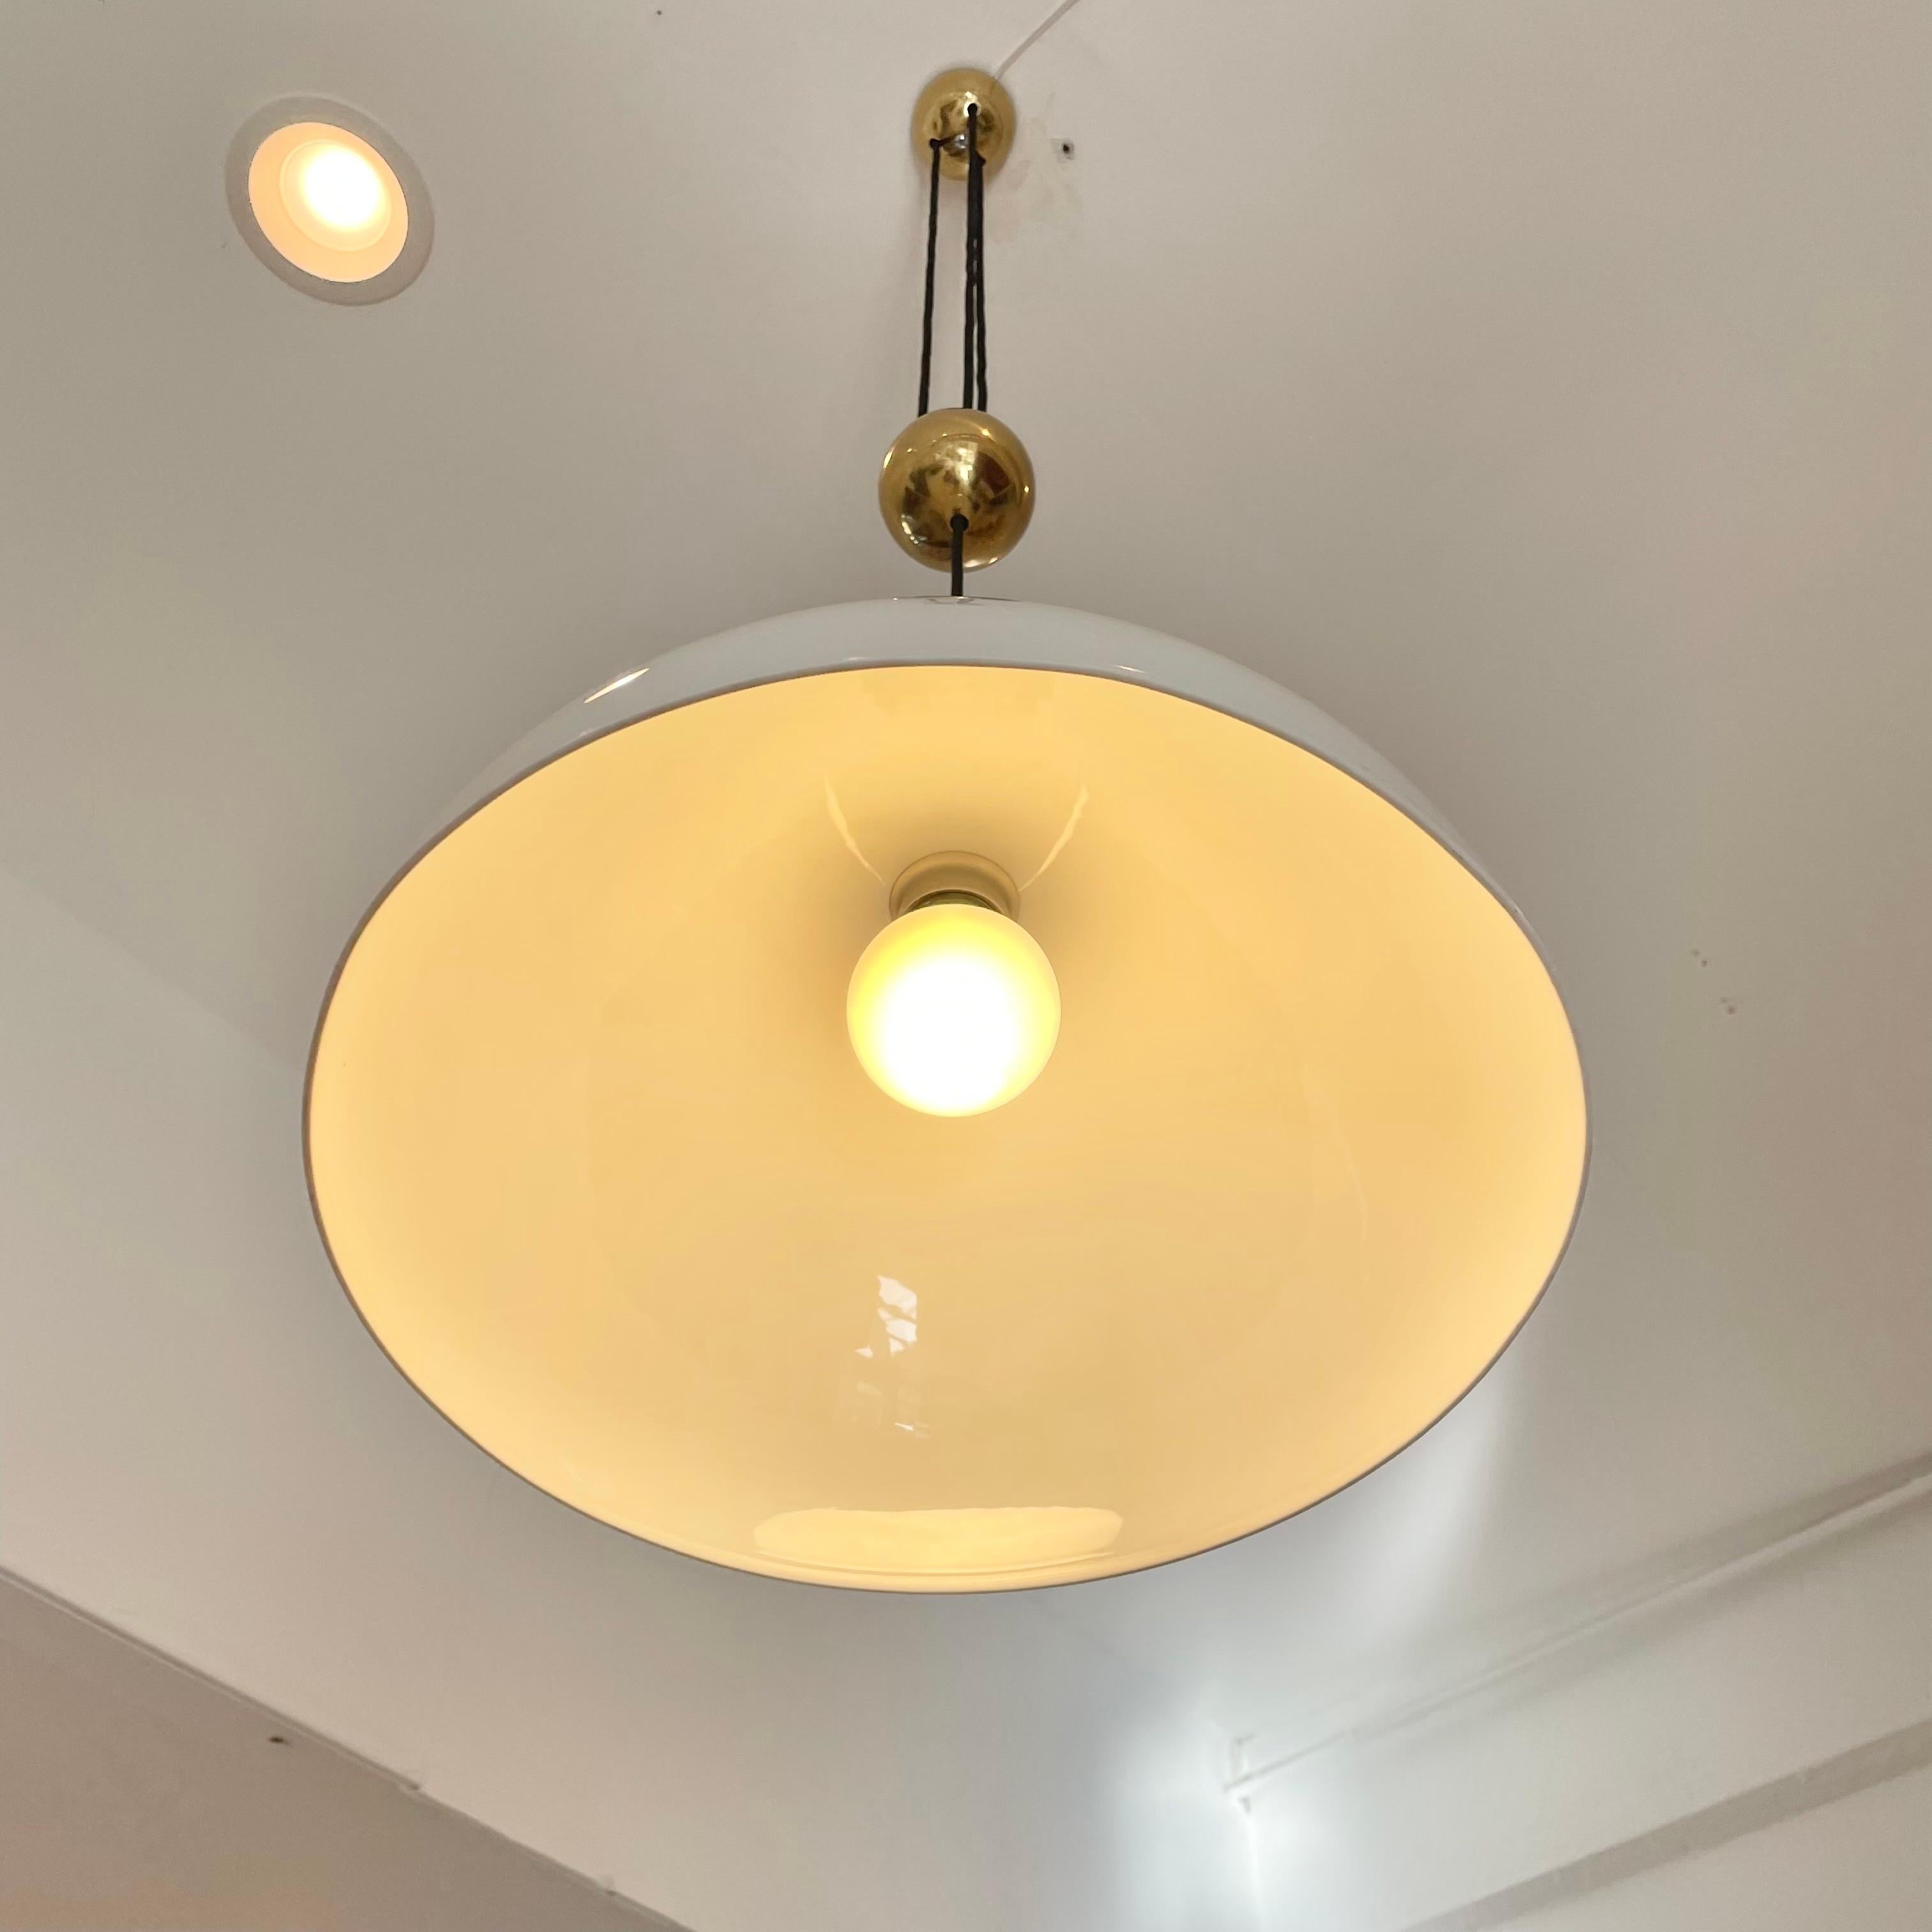 Rare counter balance pendant by Florian Schulz. Beautiful brass canopy feeds three black cloth cords with a centered brass counter balance ball. Ceramic shade in a soft cream color can be pulled down or pushed up to shorten or extend the length of